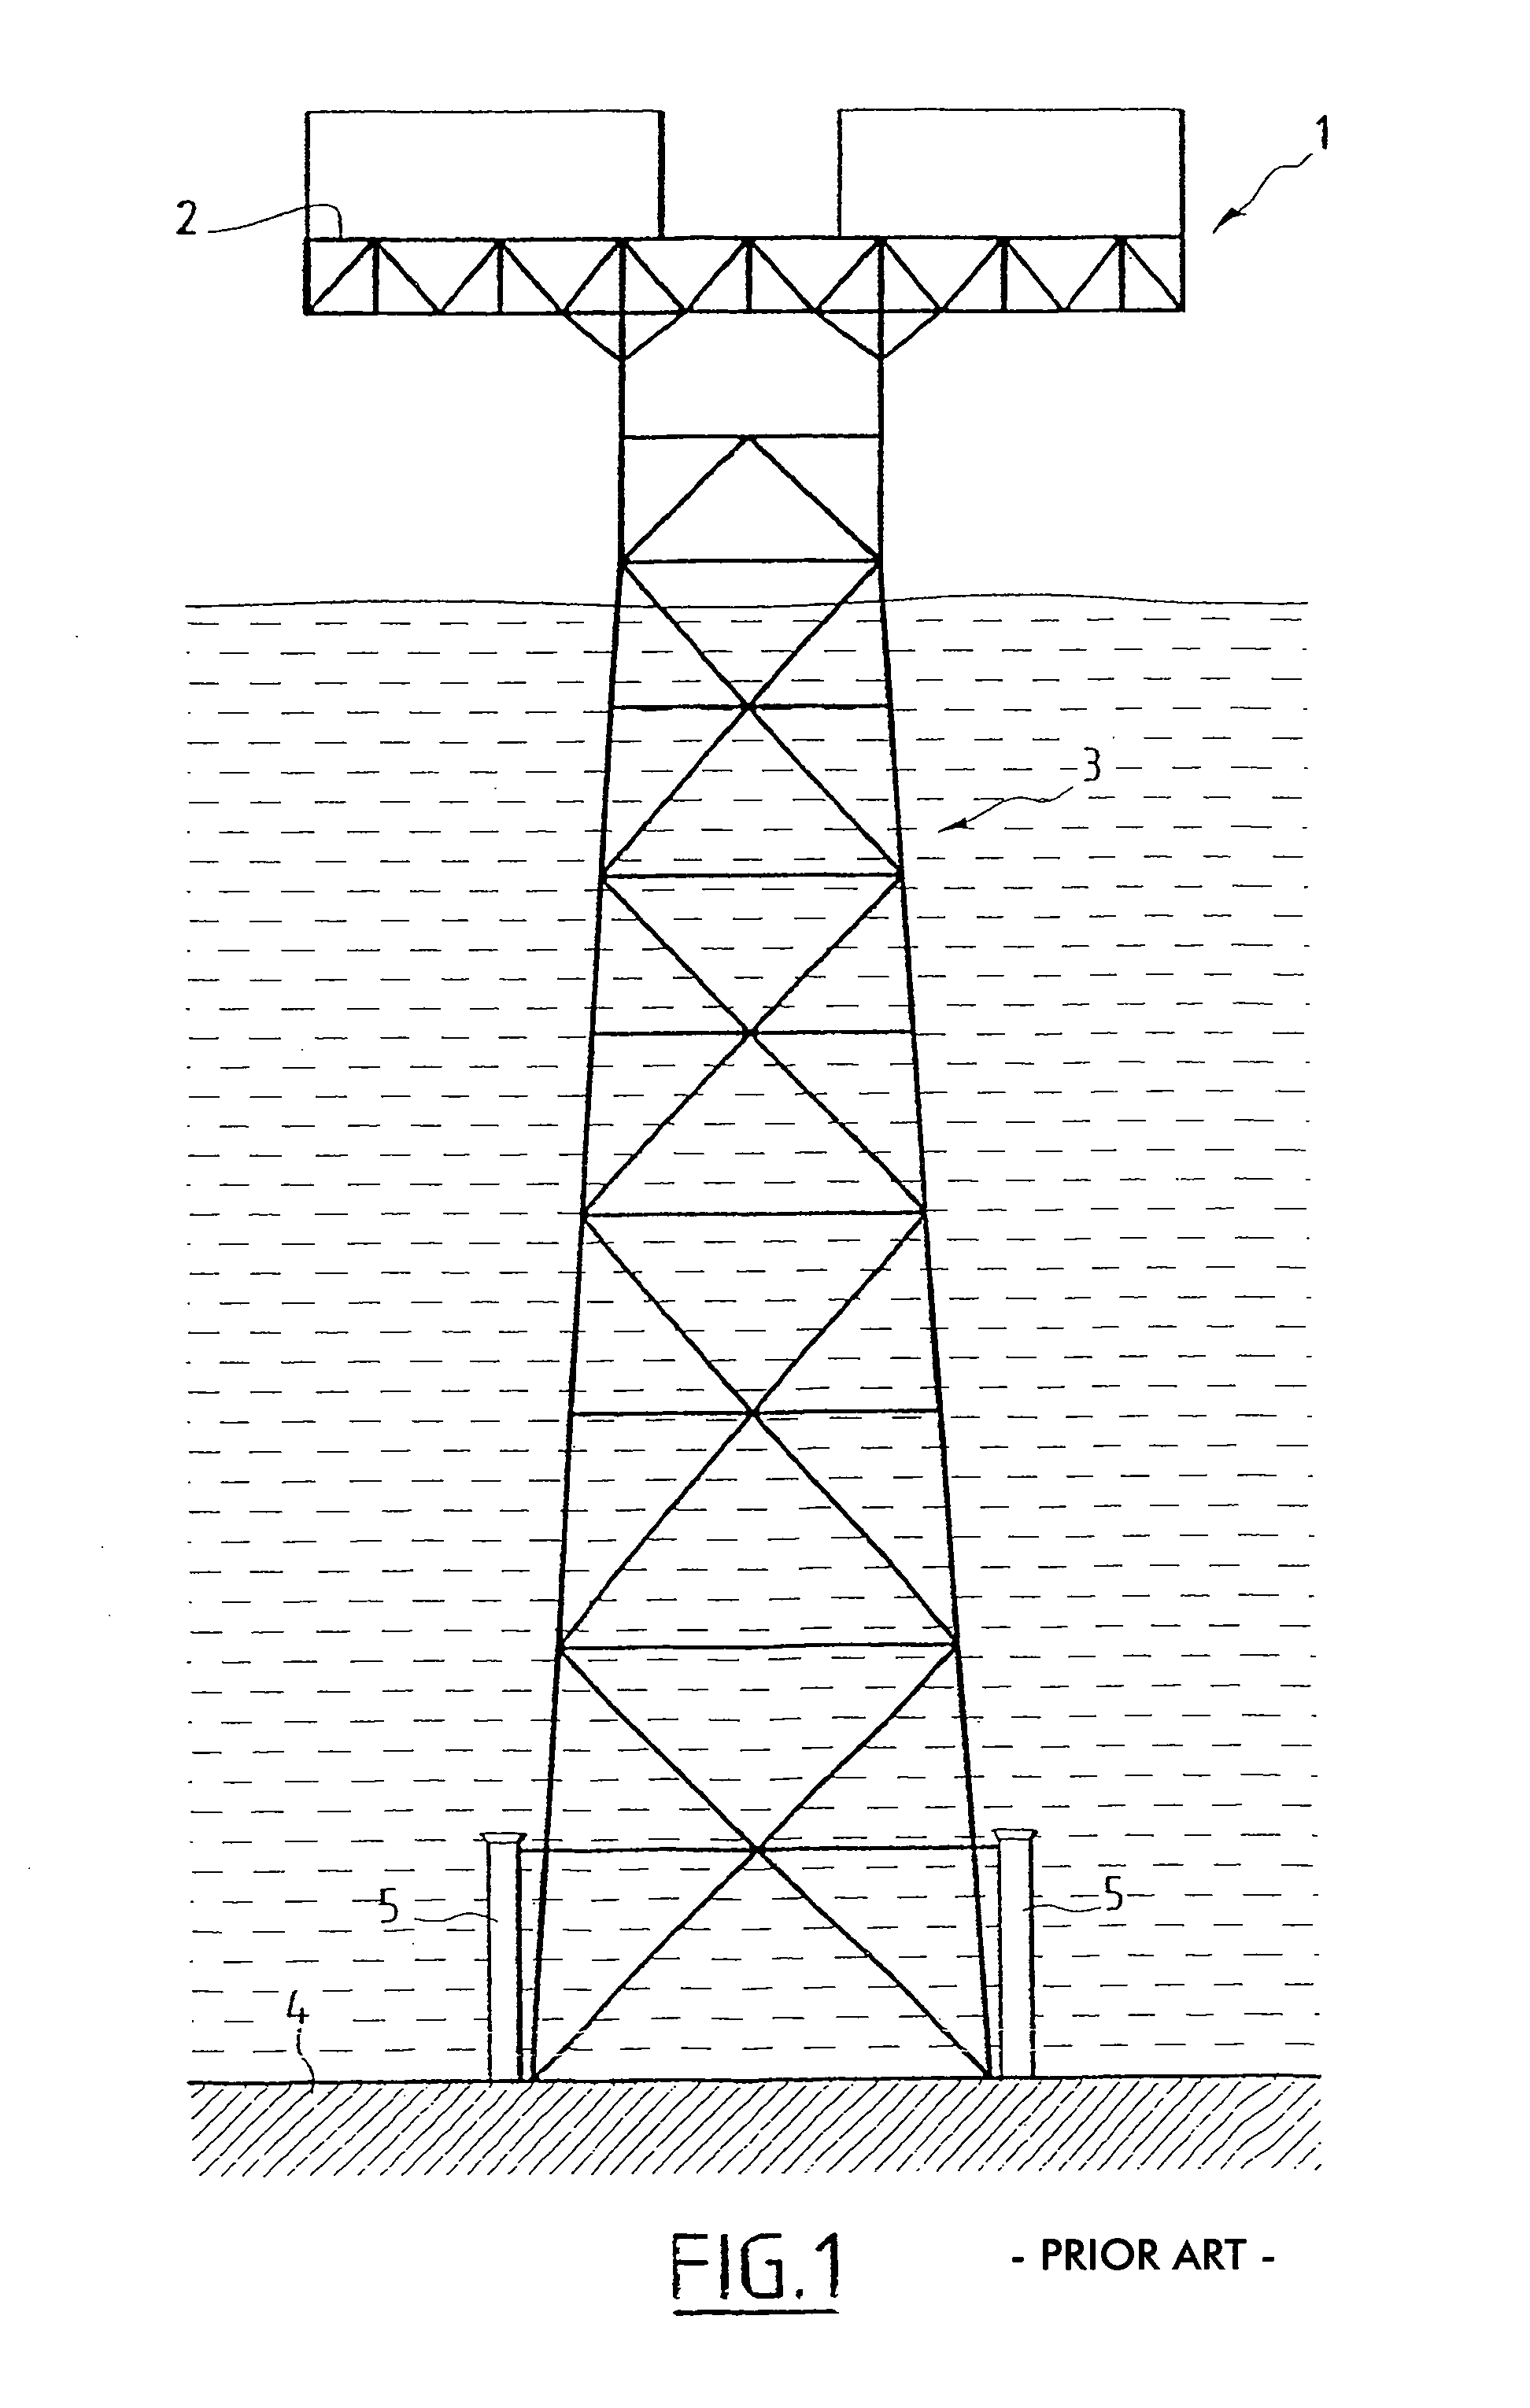 Structure for transporting, commissioning and decommissioning the elements of a fixed oil platform and methods for implementing such a structure